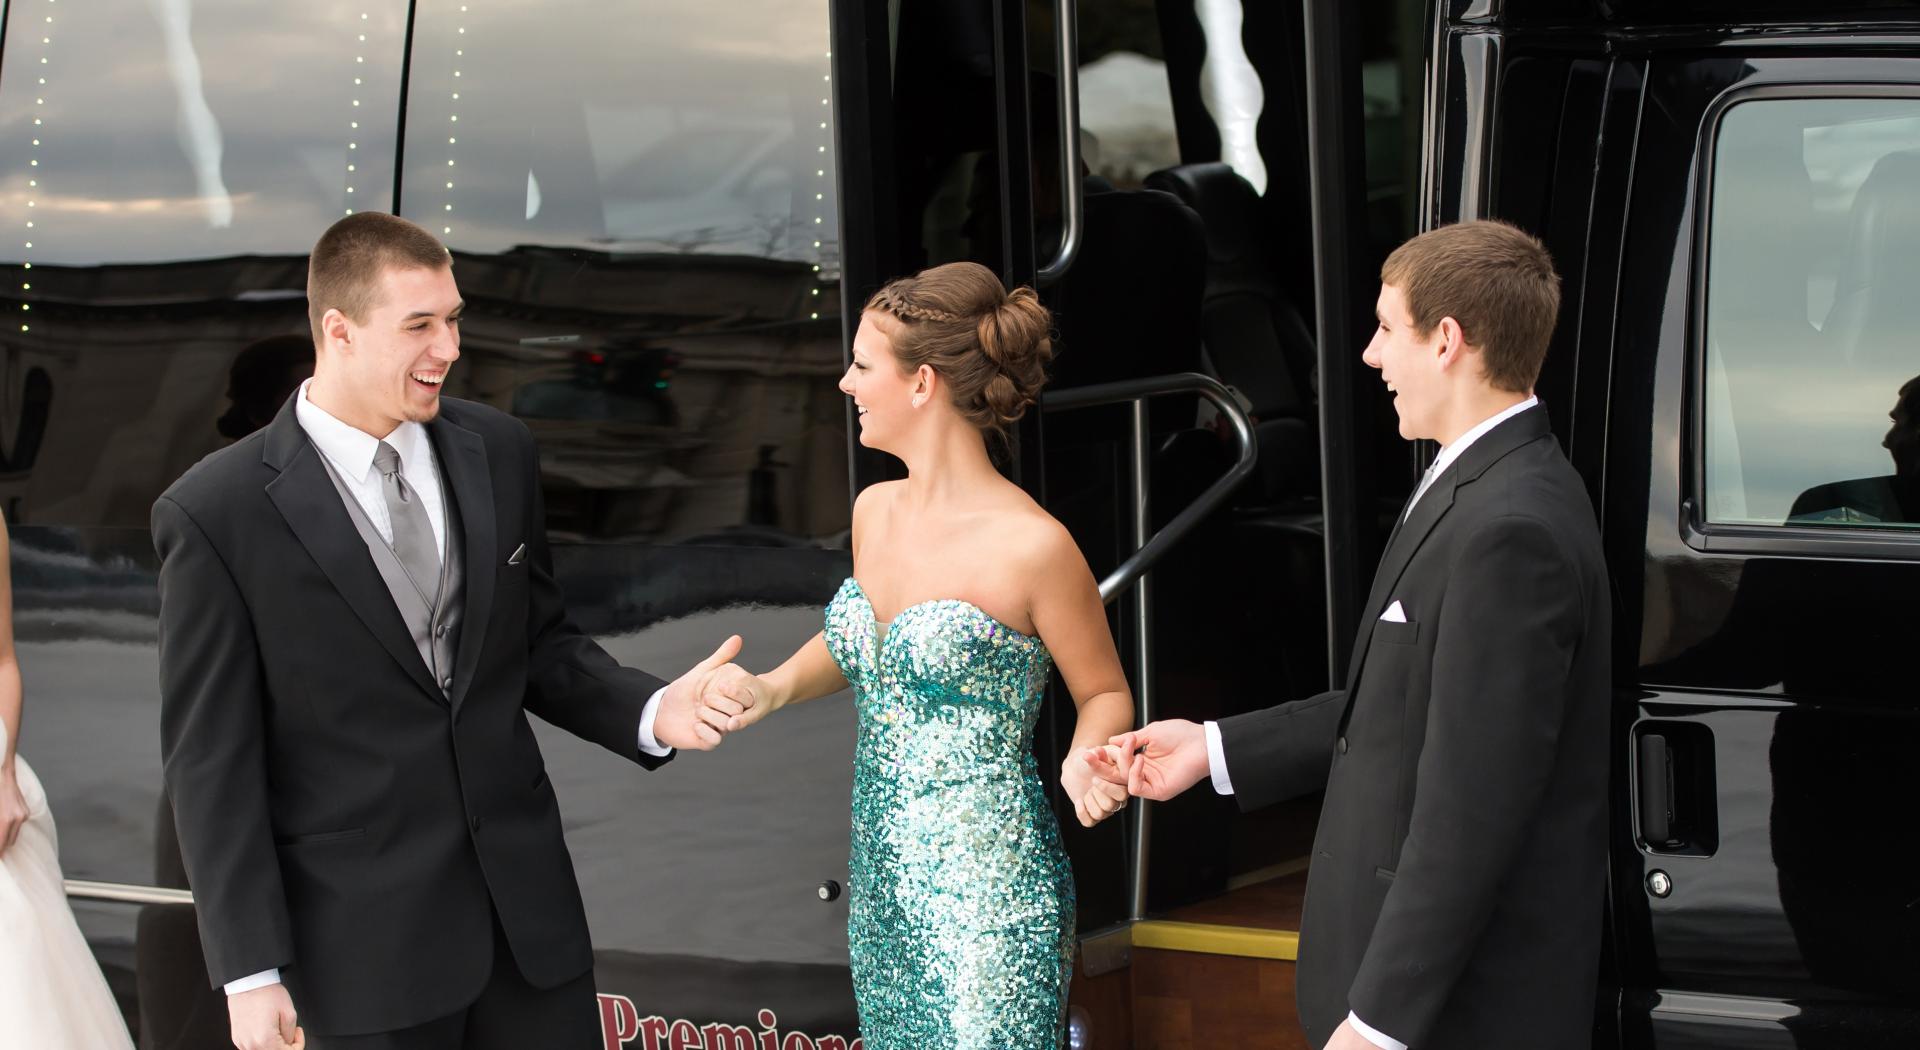 Teenagers dressed for prom in front of bus